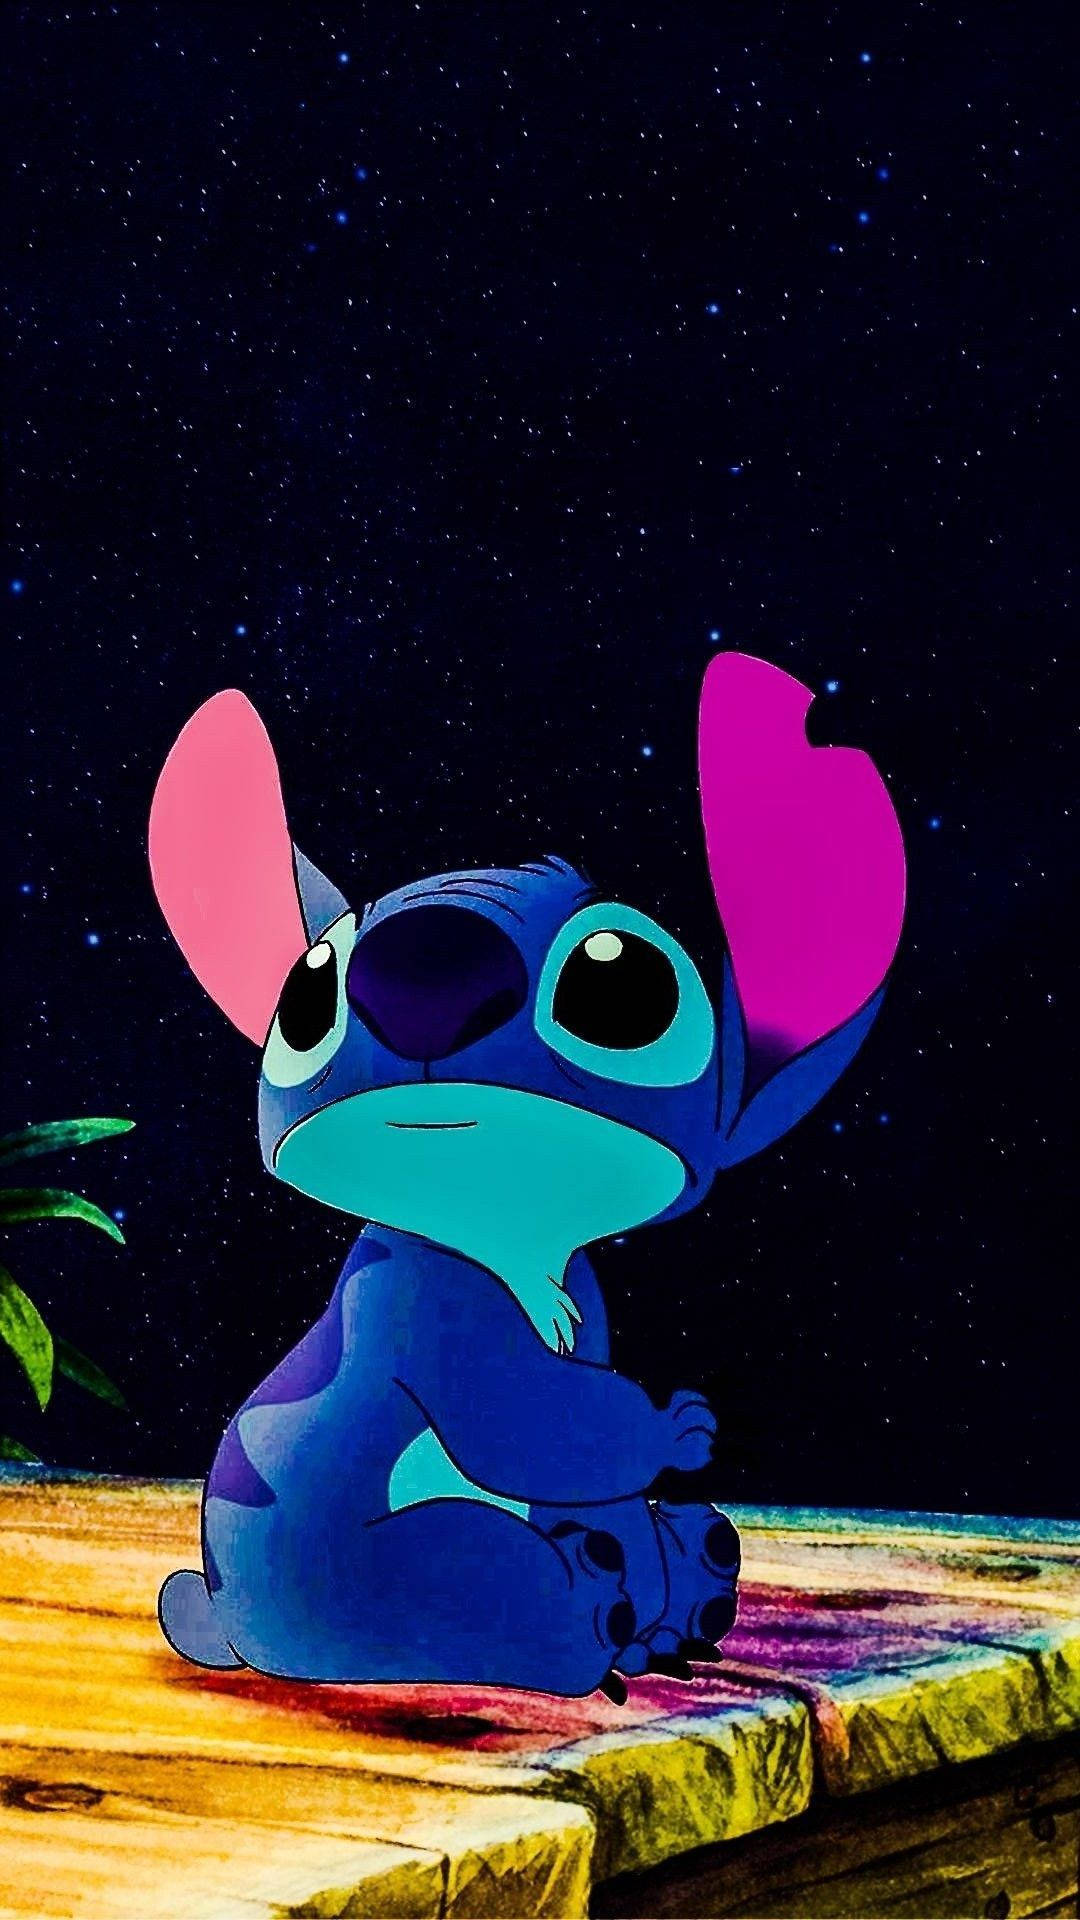 Cute Aesthetic Stitch With Night Sky Wallpaper